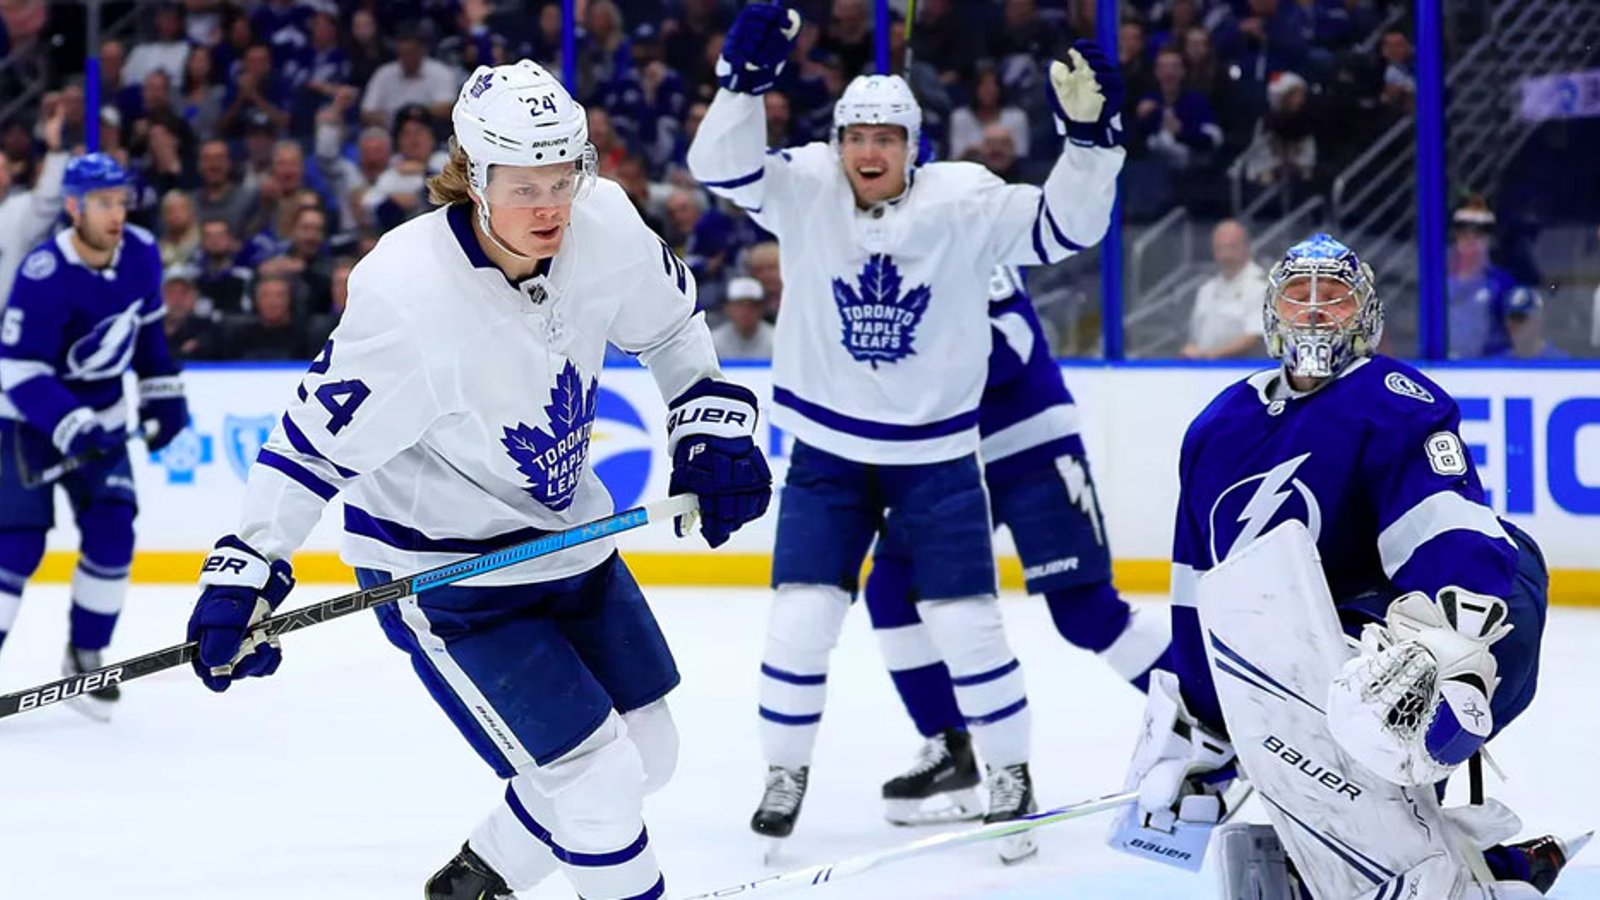 Leafs expected to ice a strong lineup against Lightning